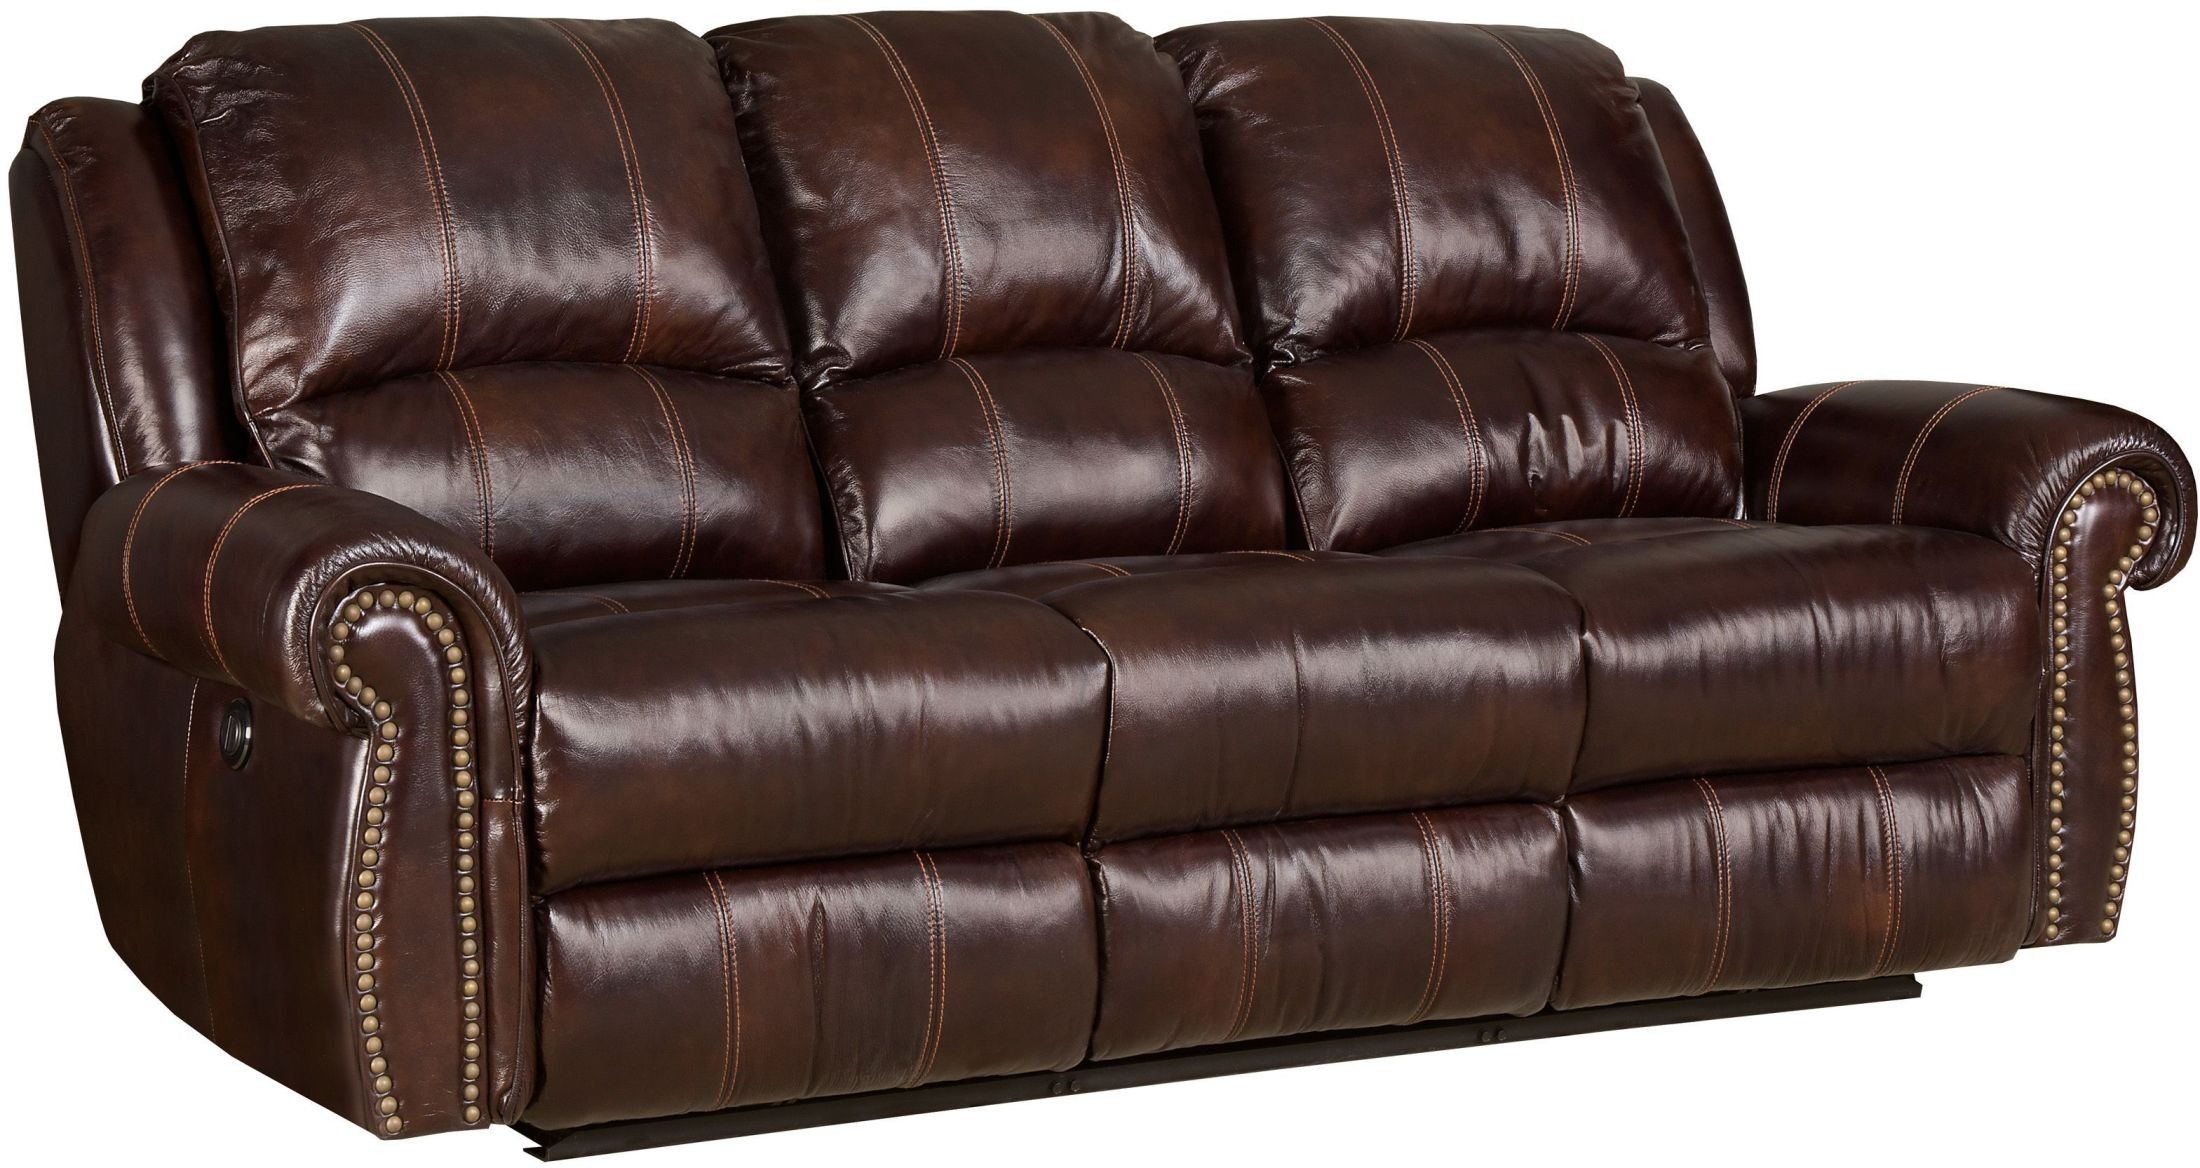 Jackson Brown Power Leather Reclining Sofa From Hooker With Regard To Expedition Brown Power Reclining Sofas (View 5 of 15)